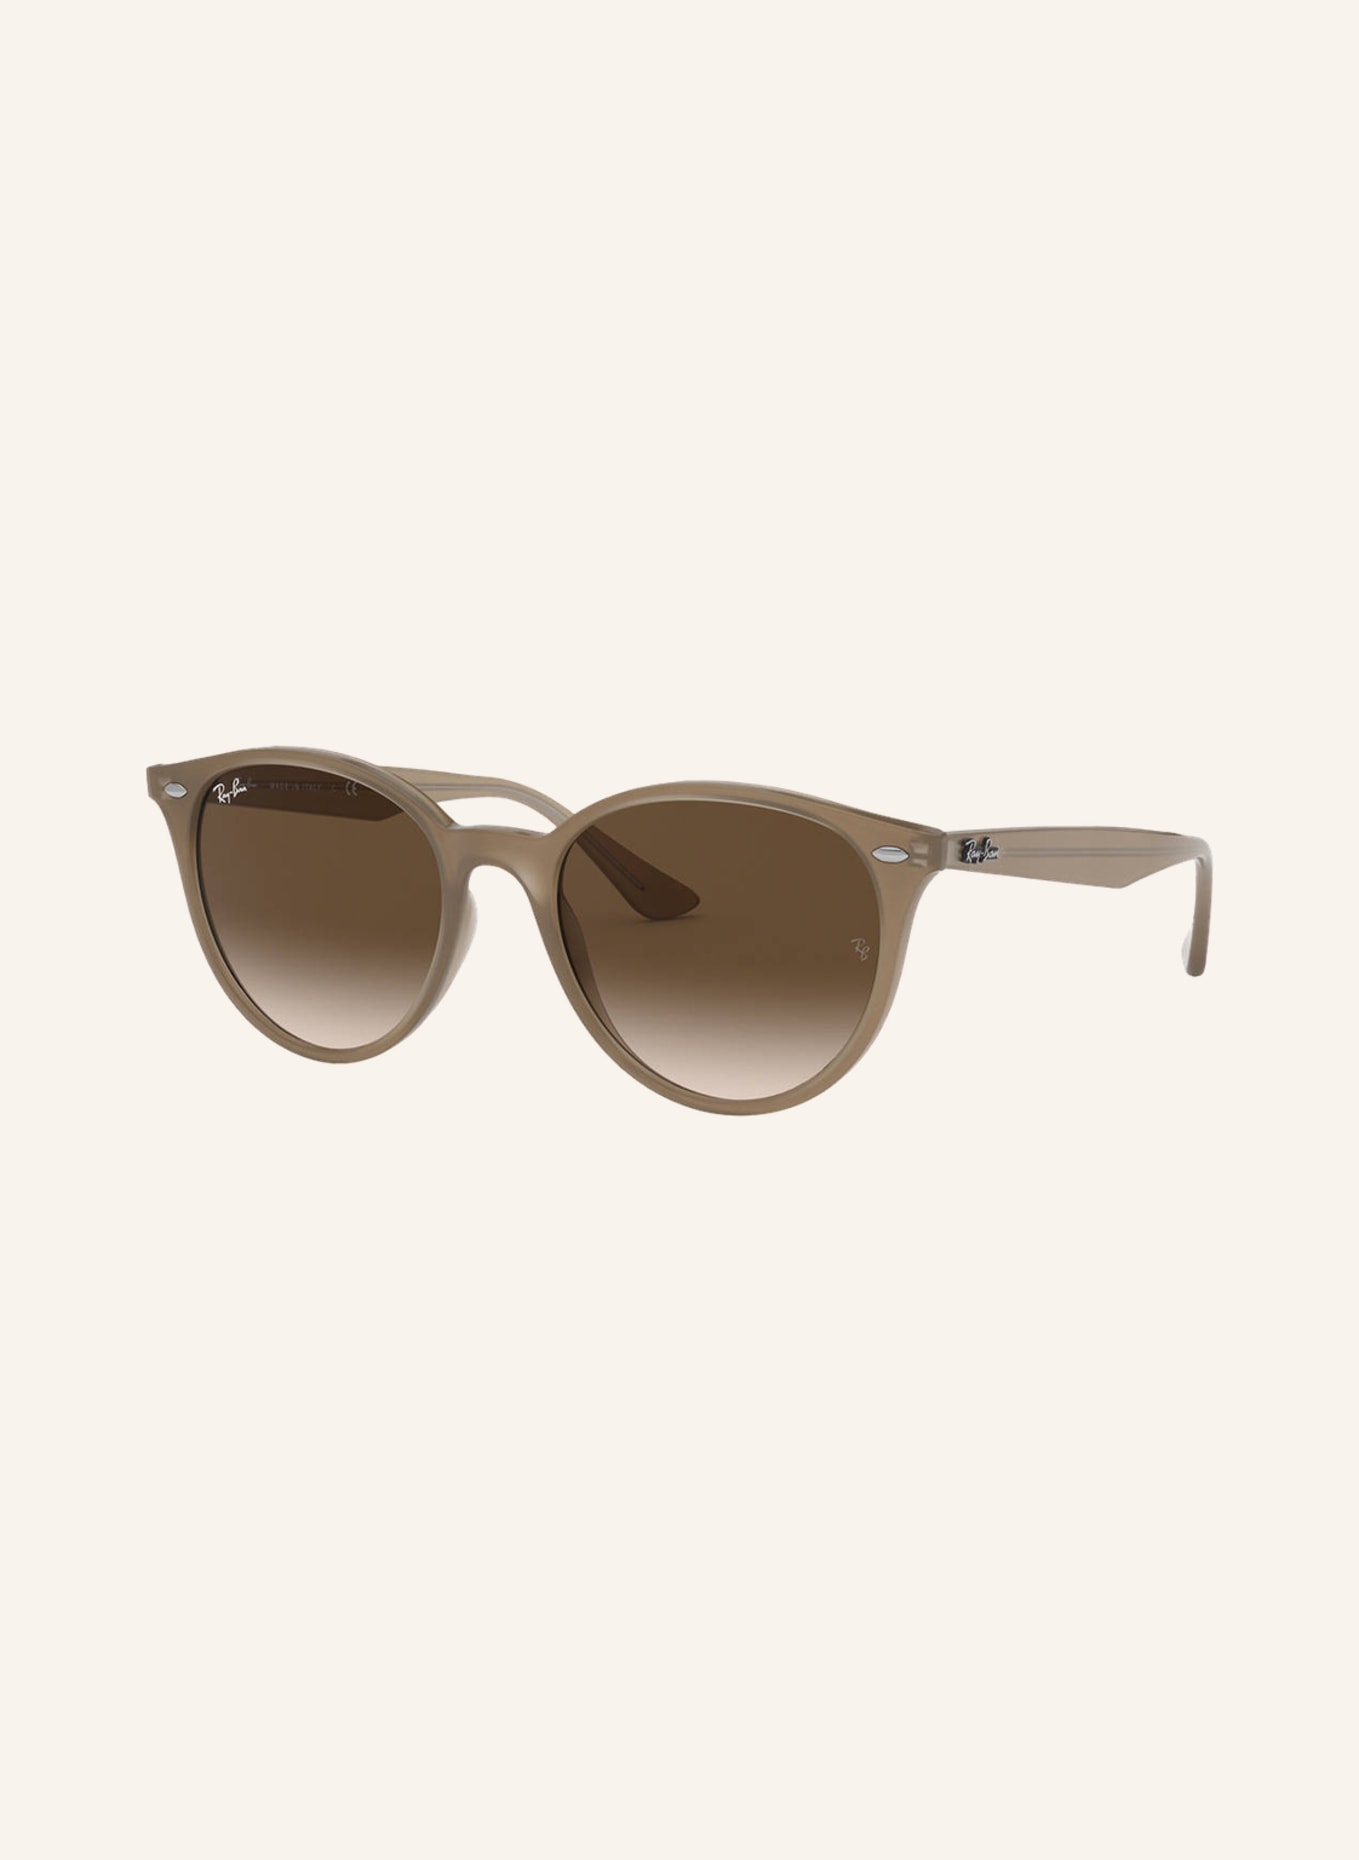 Ray-Ban Sunglasses RB4305, Color: 616613 - BEIGE/ BROWN (Image 1)